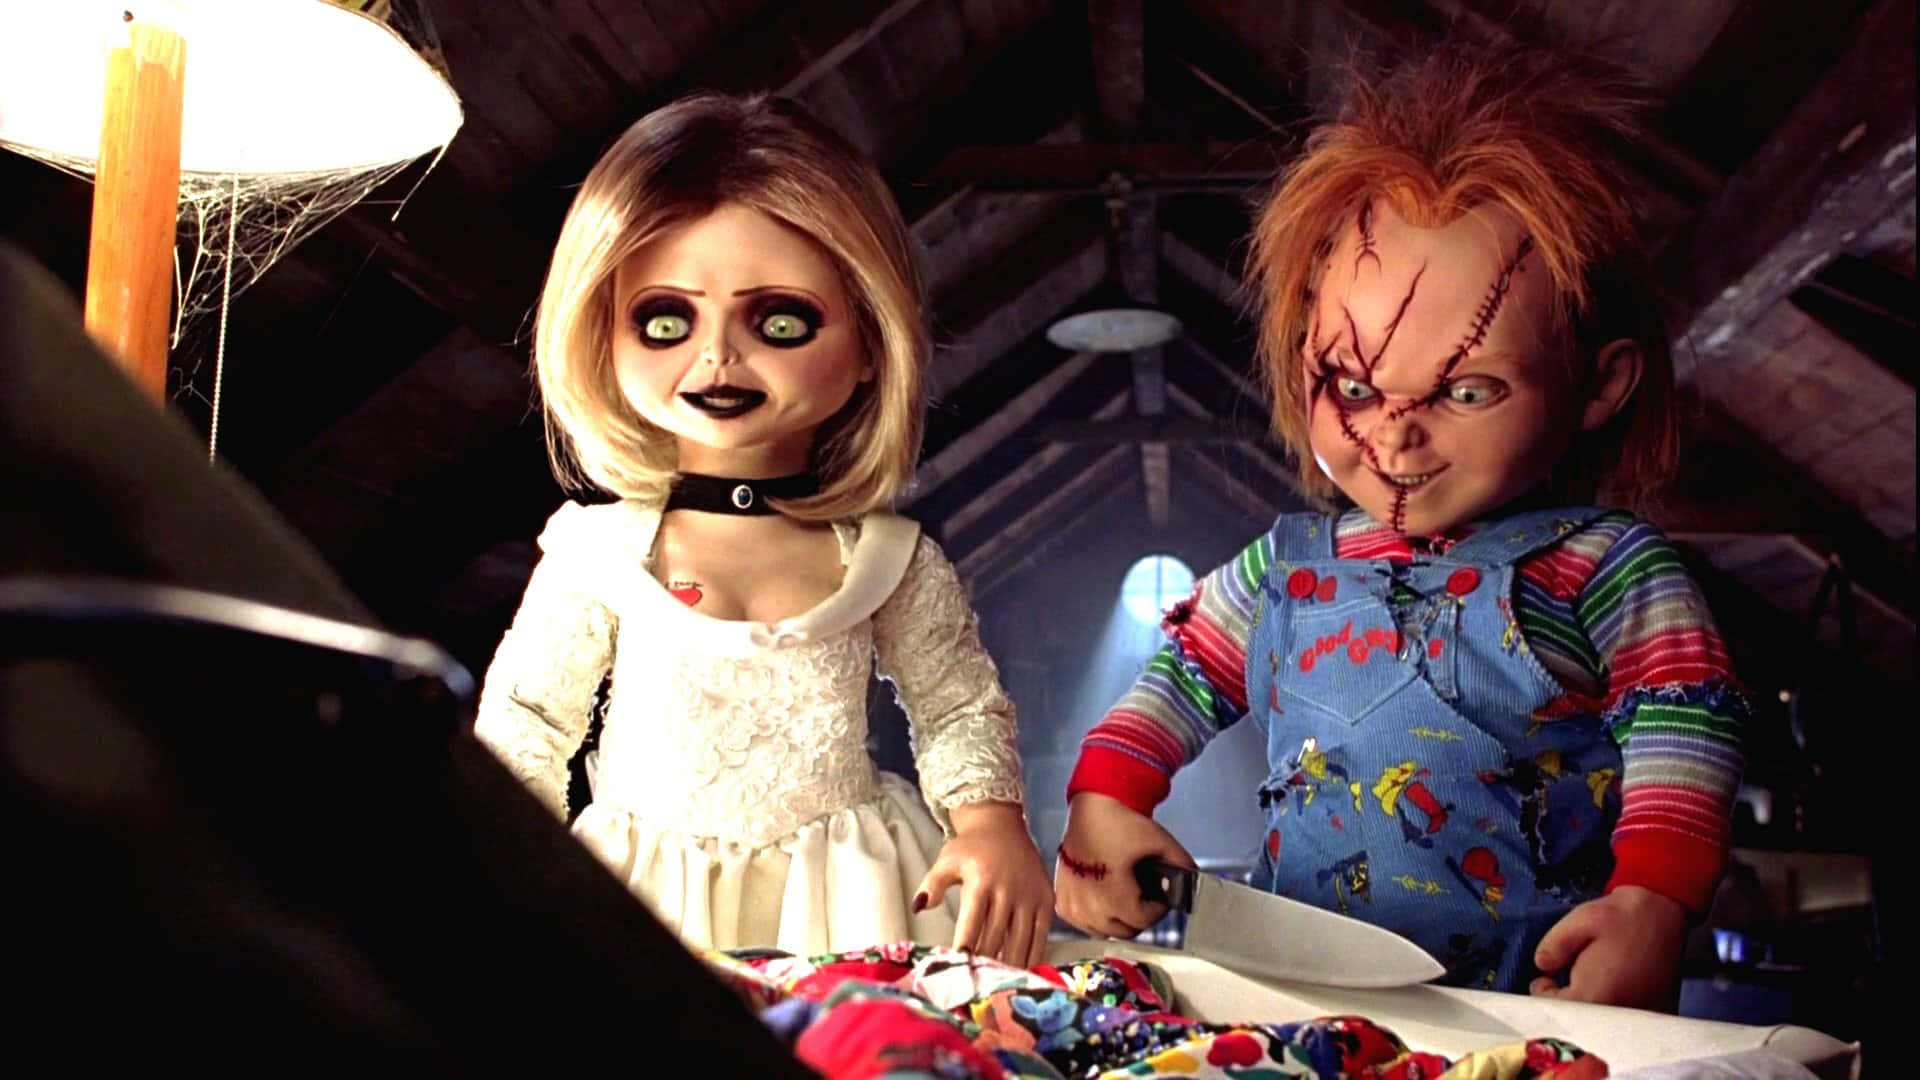 "Chucky and Tiffany, lovers with a dark past" Wallpaper